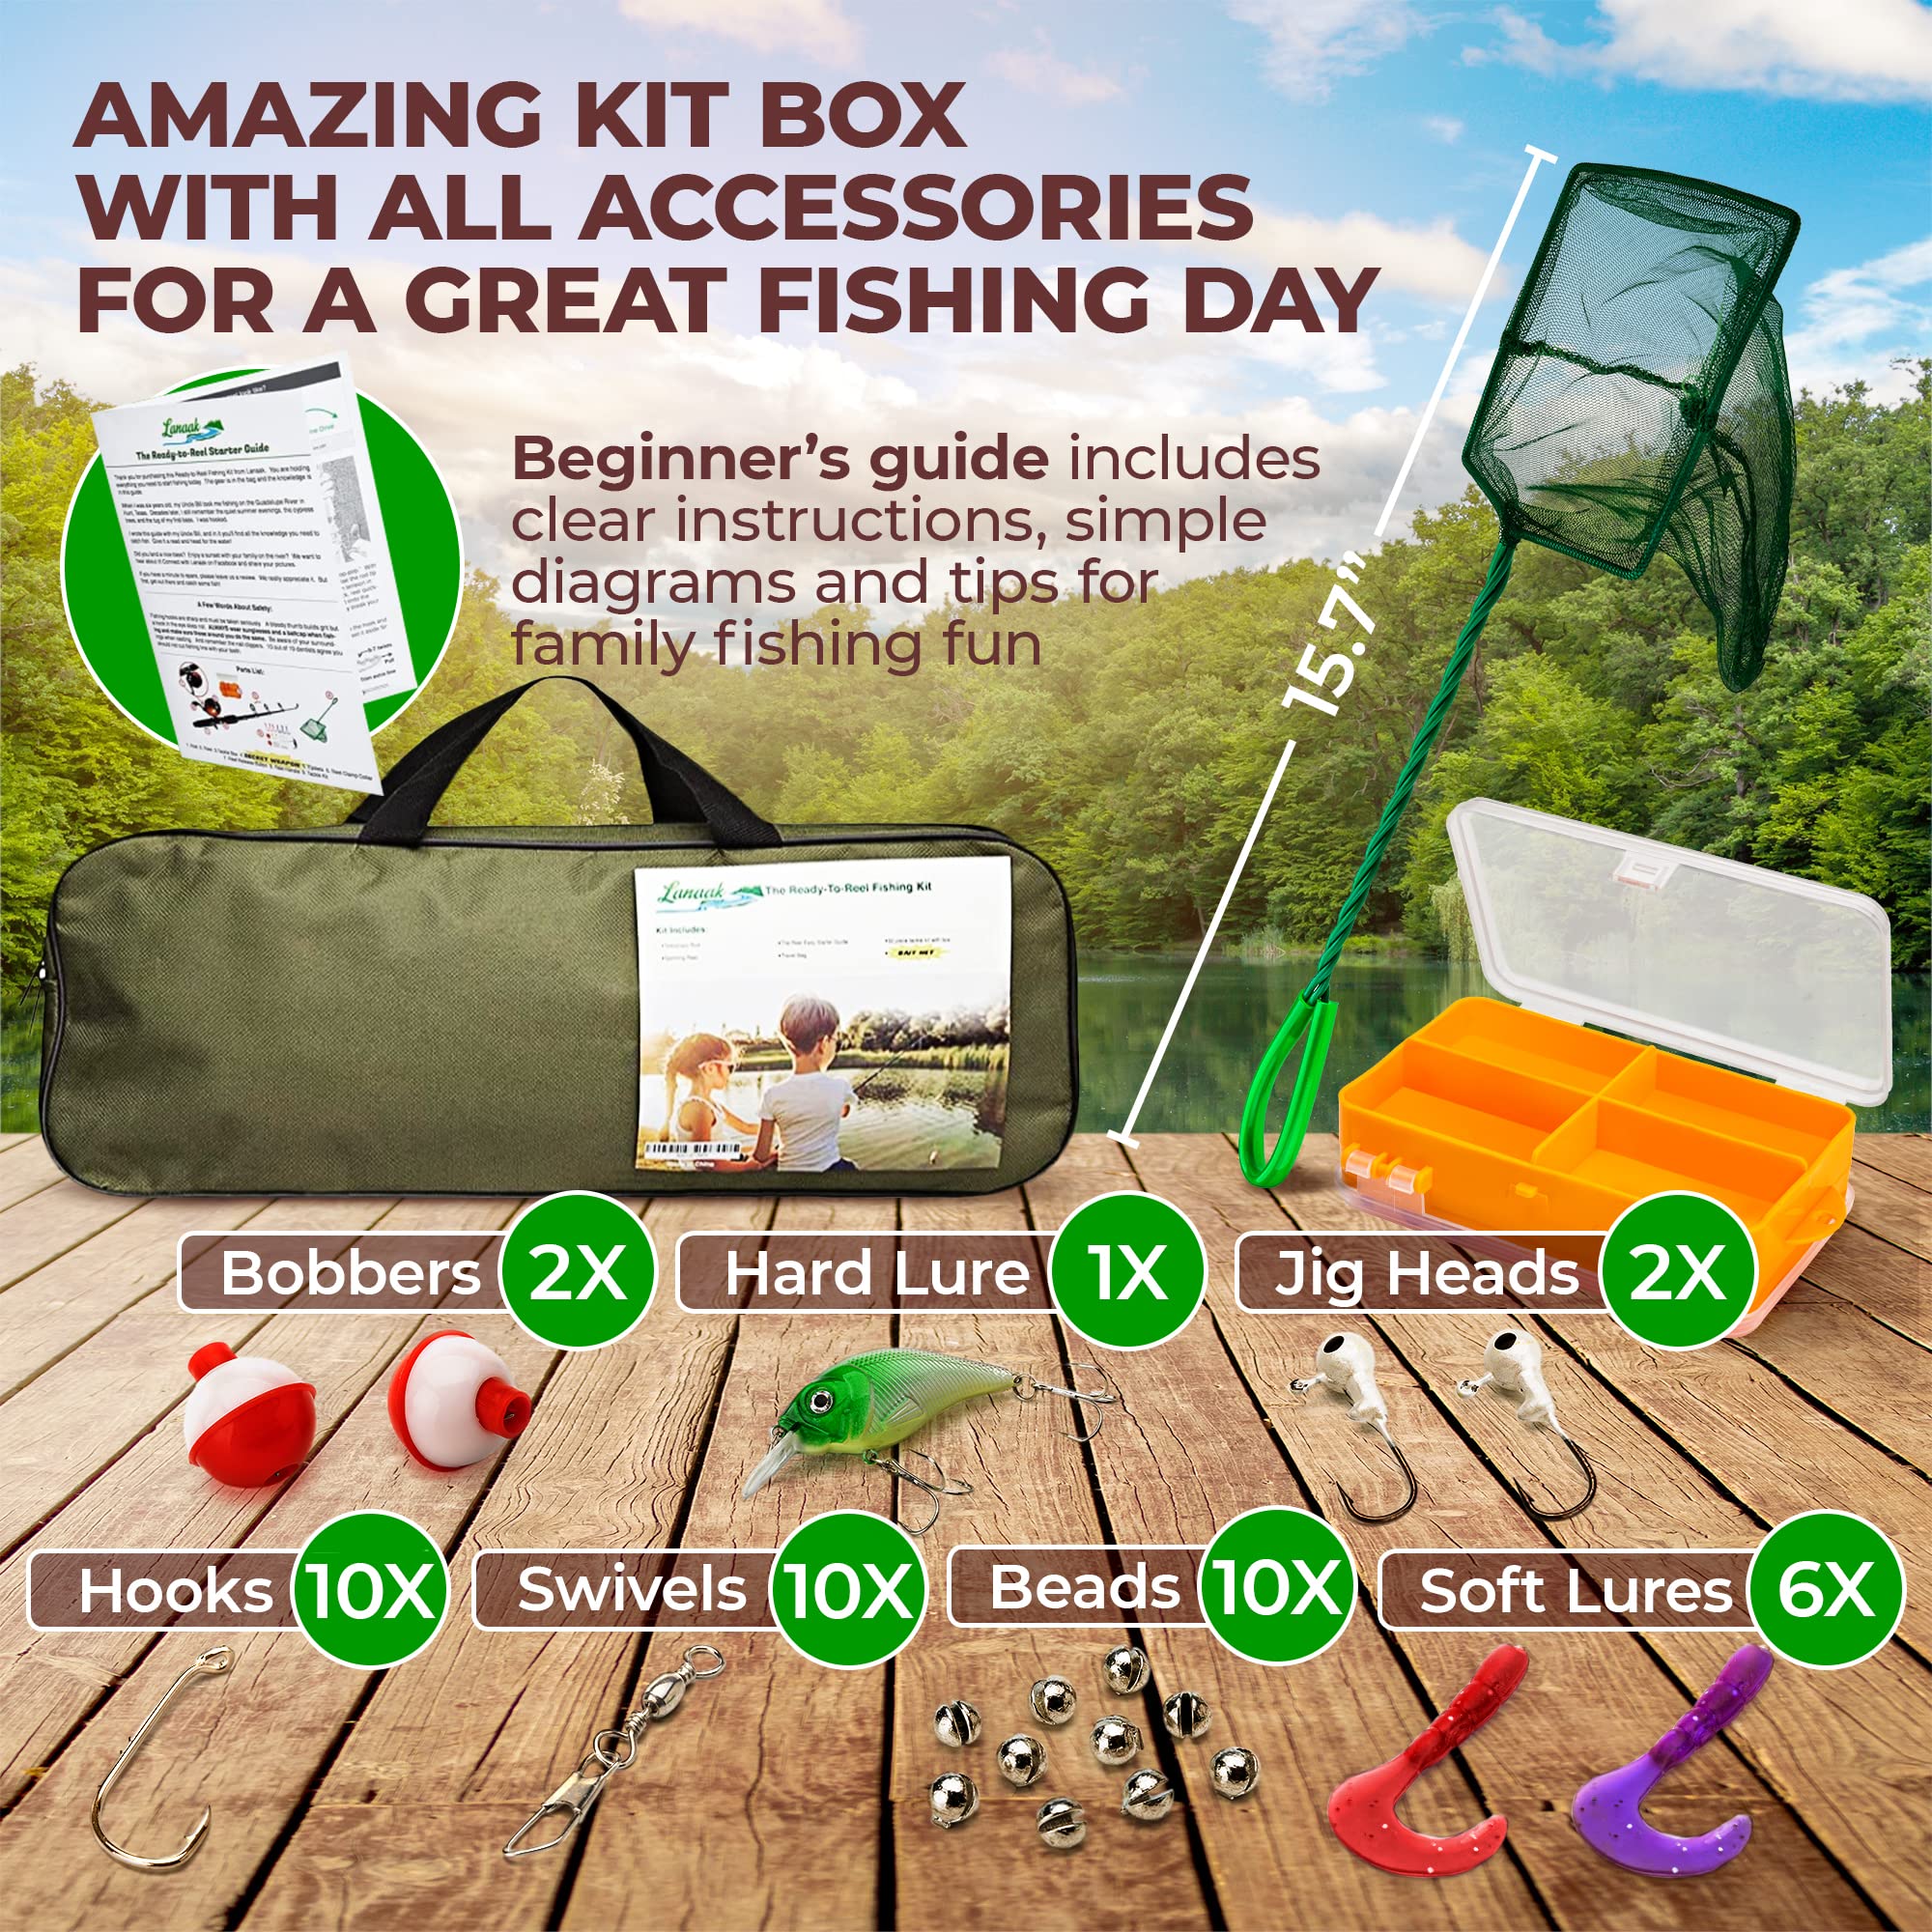 Lixada Kids Fishing Pole Kit, 47'' Telescopic Rod and Reel Beginner Combo with Spincast Reel,Tackle Box,Fishing Gear Gifts for Boys,Girls, Toddler